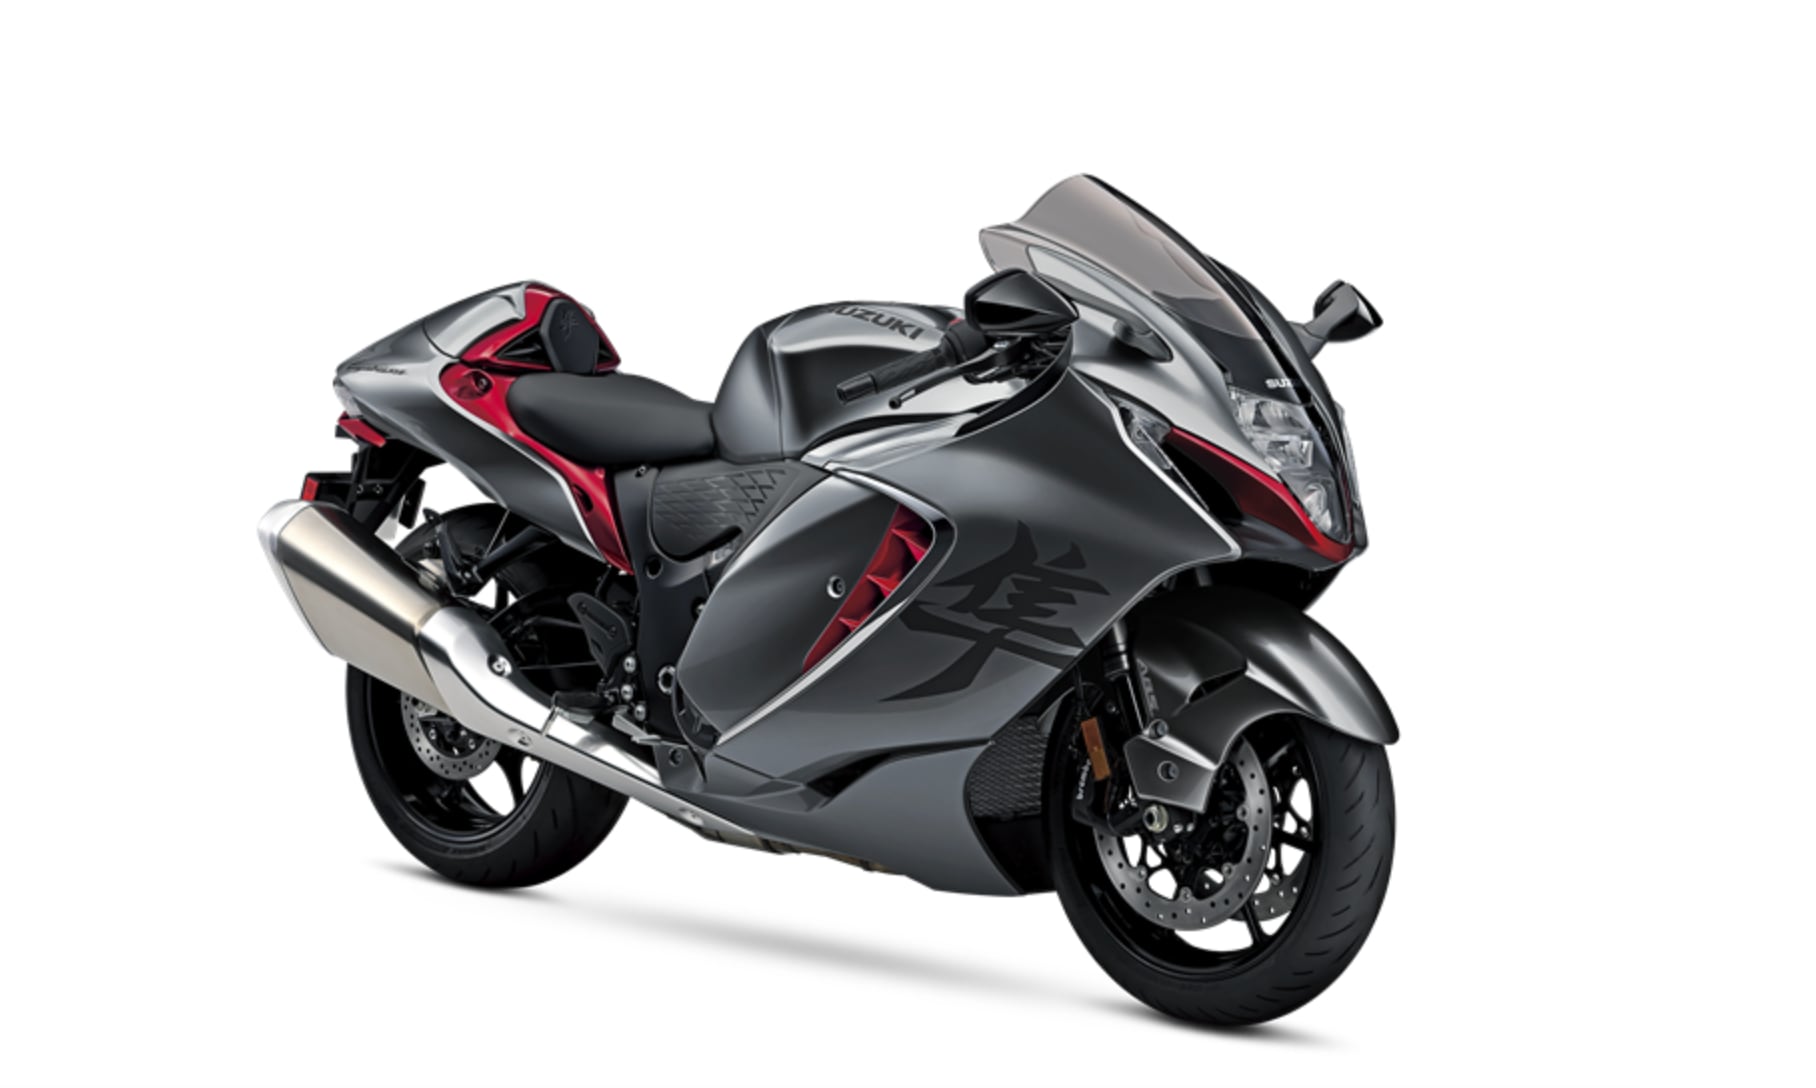 JK, the Suzuki Hayabusa is <i>not</i> one of the most fun motorcycles to ride, according to you.